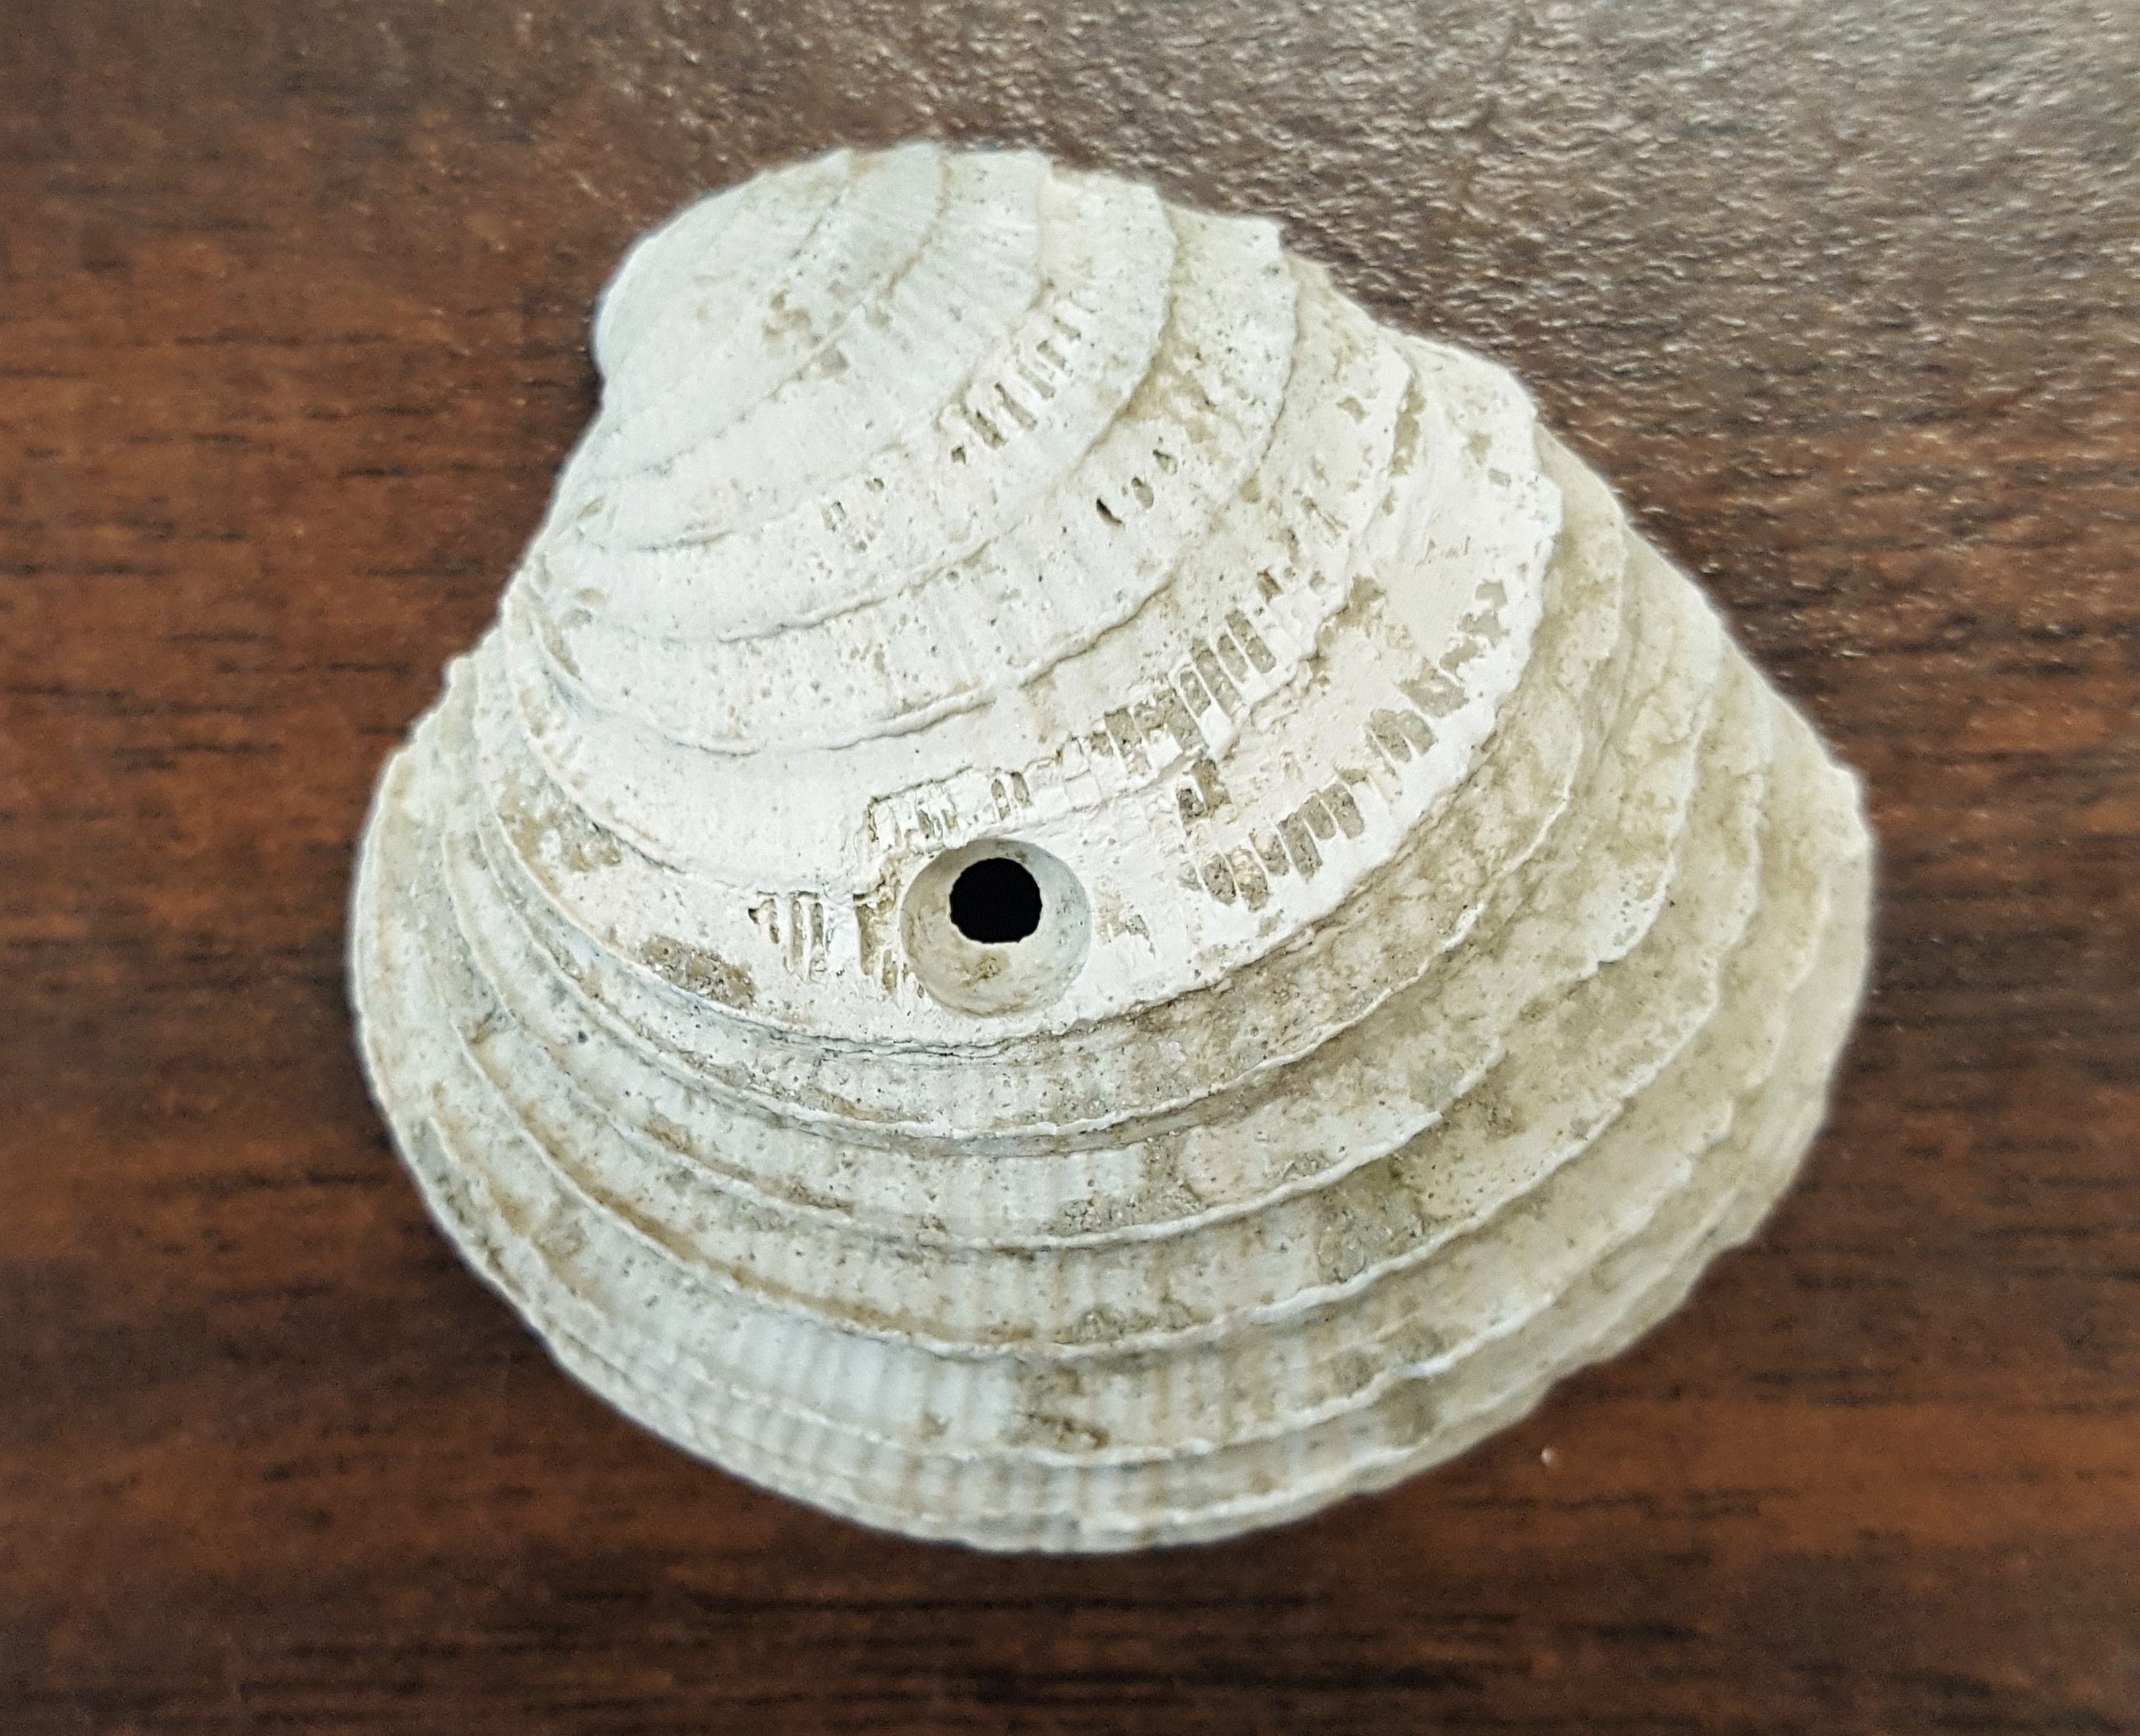 clam shell with beveled hole through the centre from a snail (shell drilling predator).